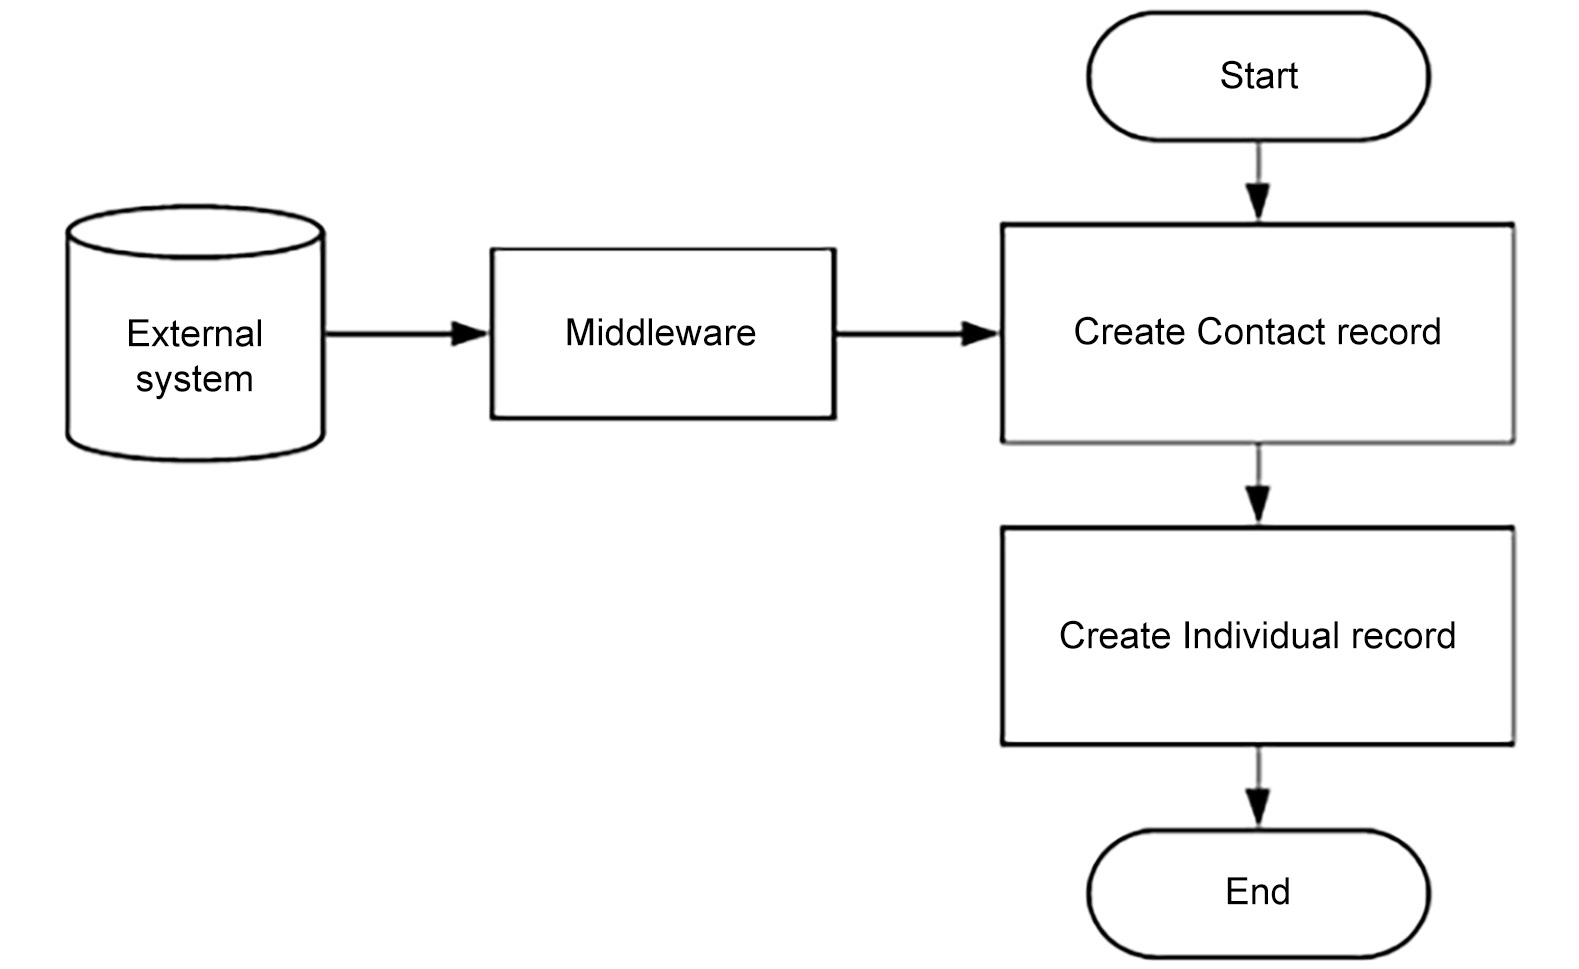 An example of a mixed diagram that mixed a flowchart with a landscape architecture diagram.